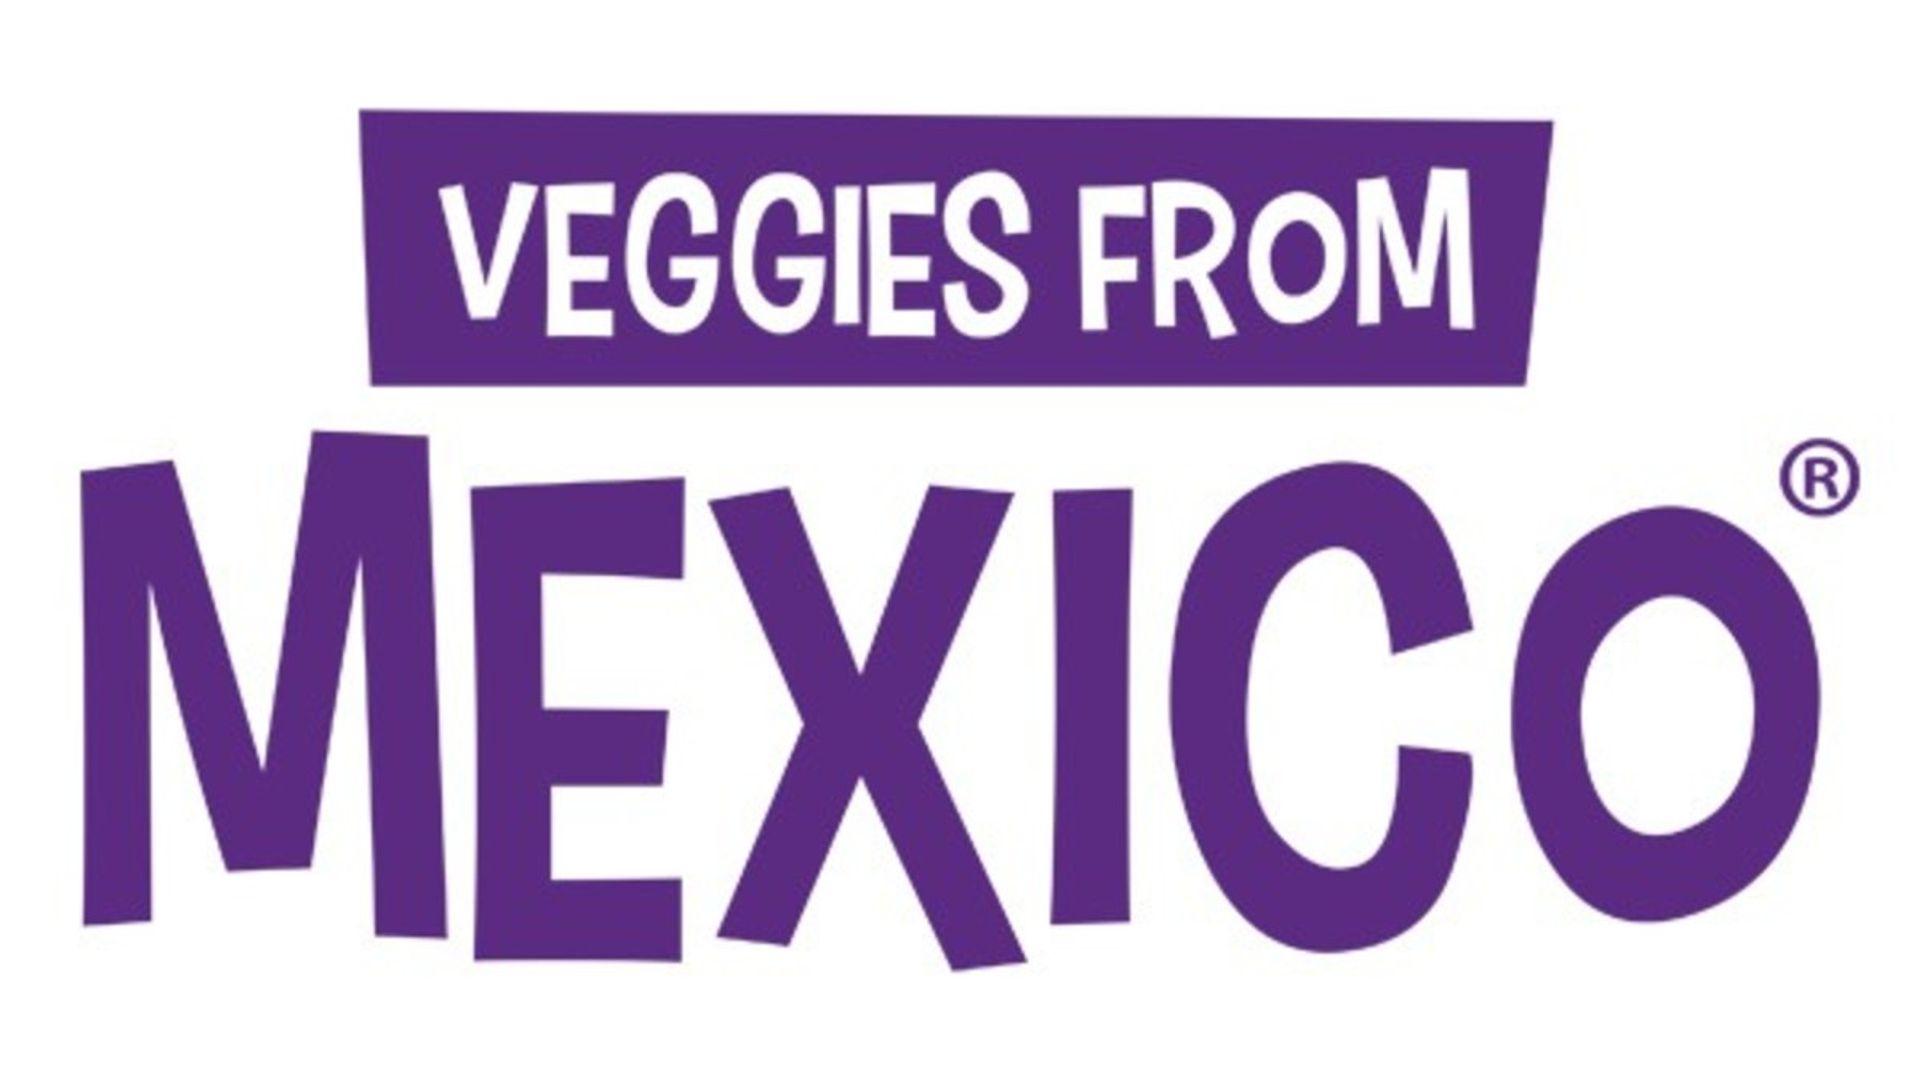 Image of the Veggies from Mexico logo